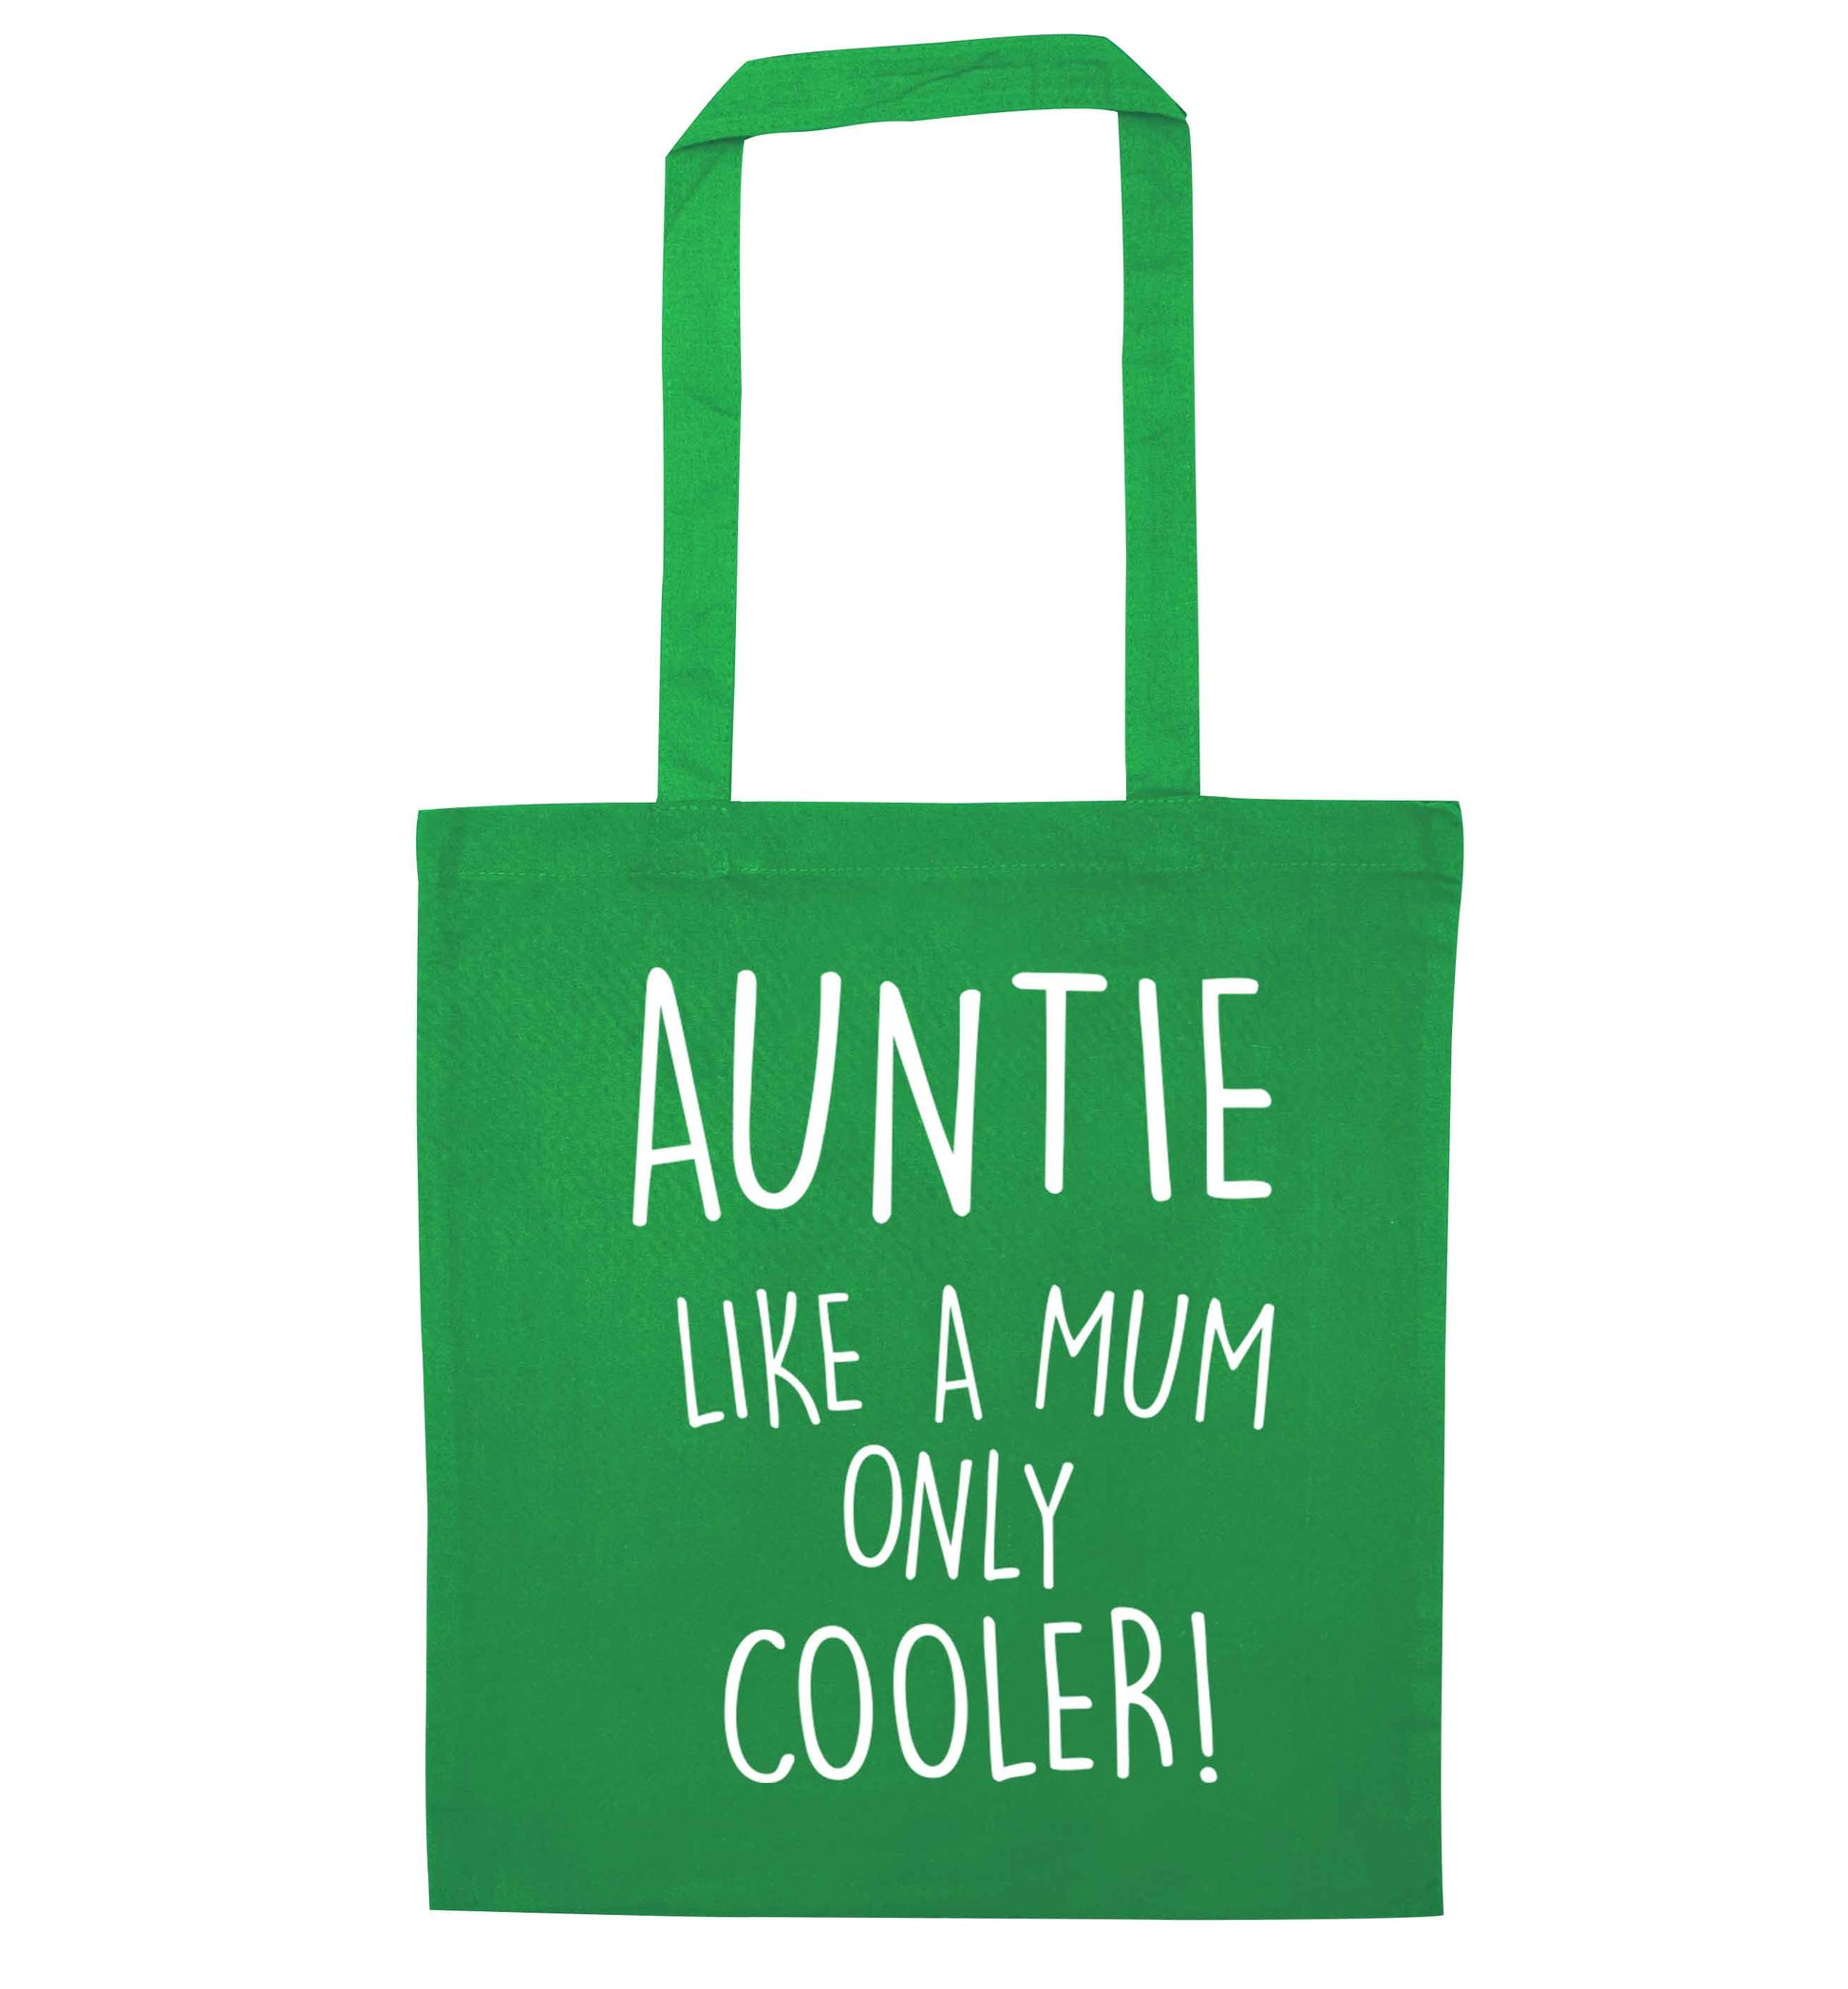 Auntie like a mum only cooler green tote bag